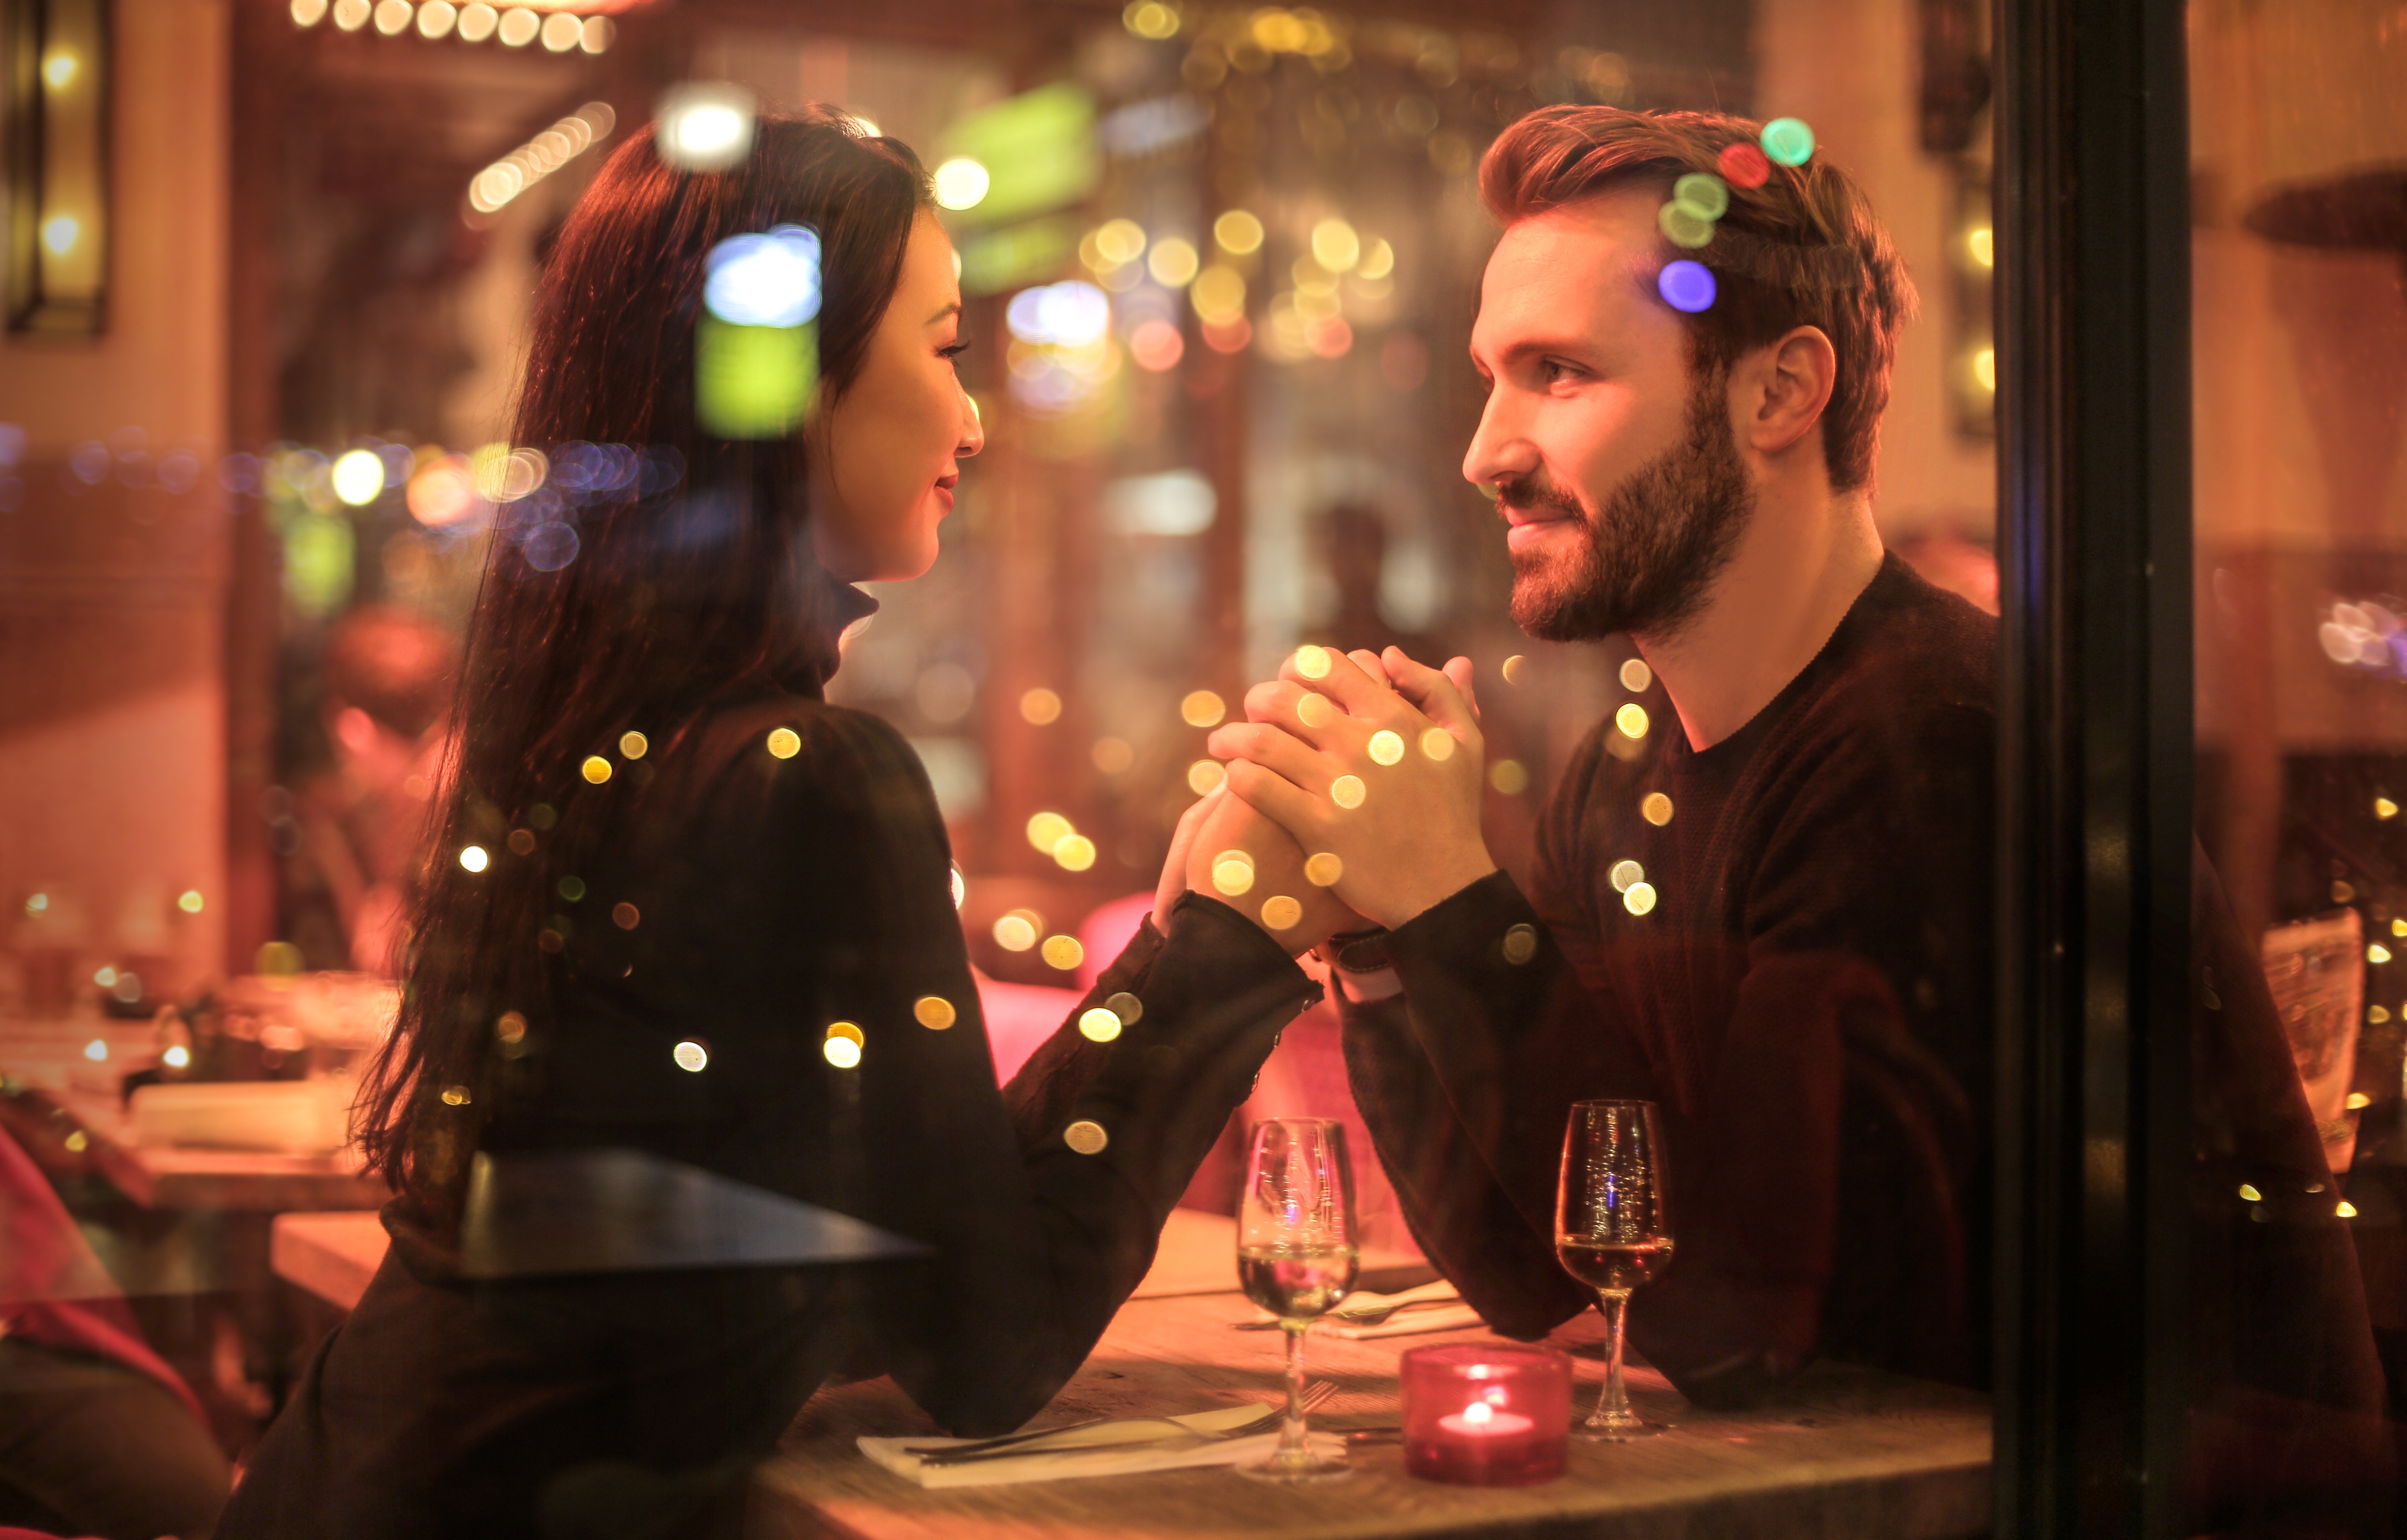 Man and woman sitting in a restaurant | Photo: Pexels